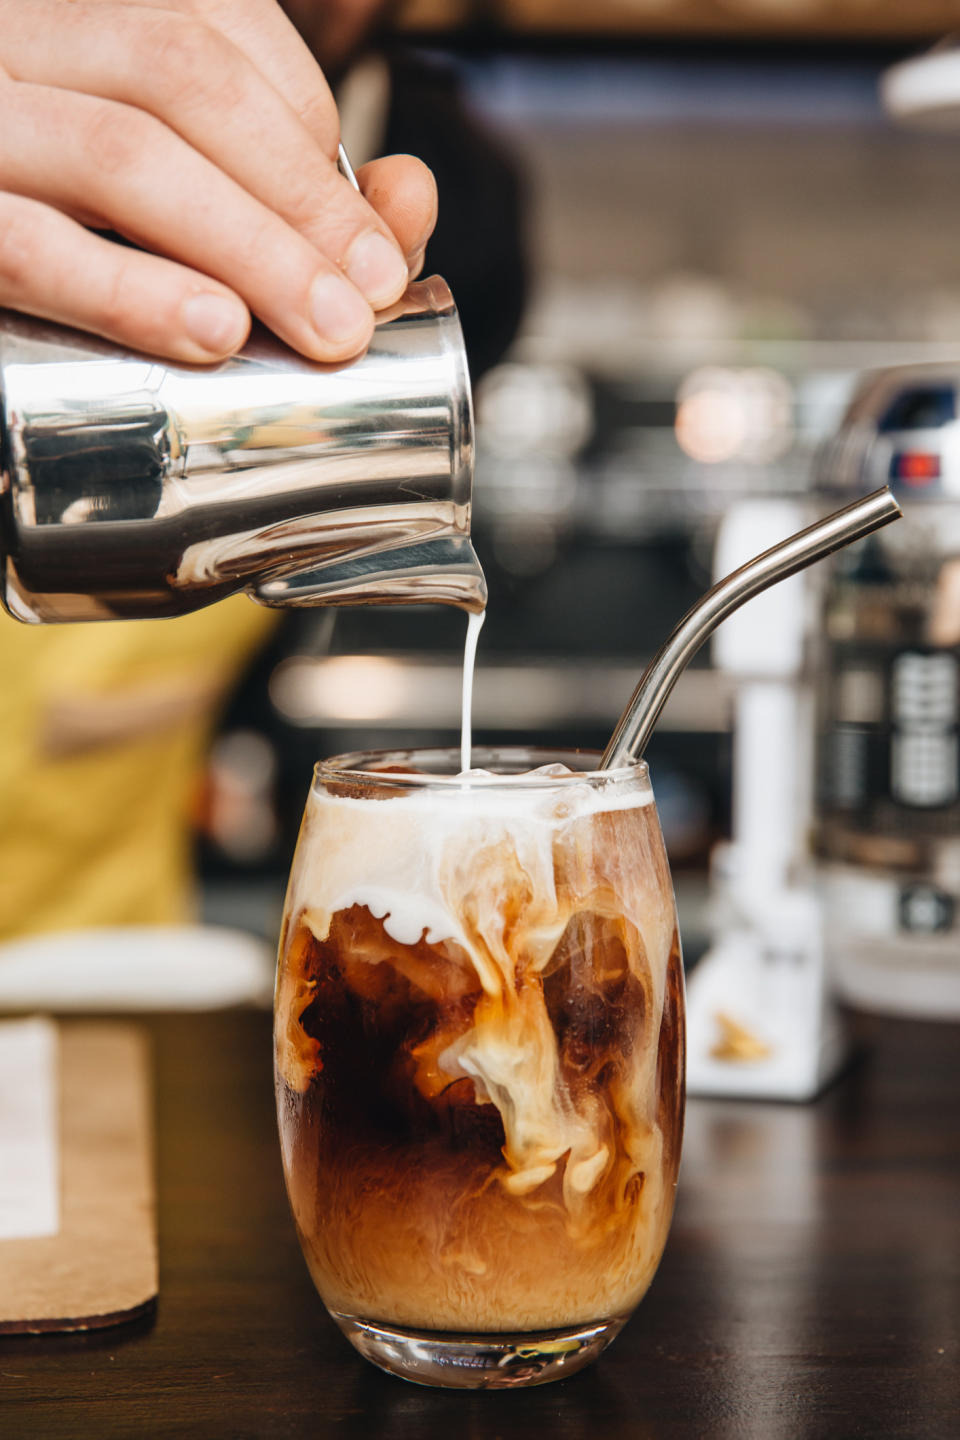 Pouring milk into iced coffee.